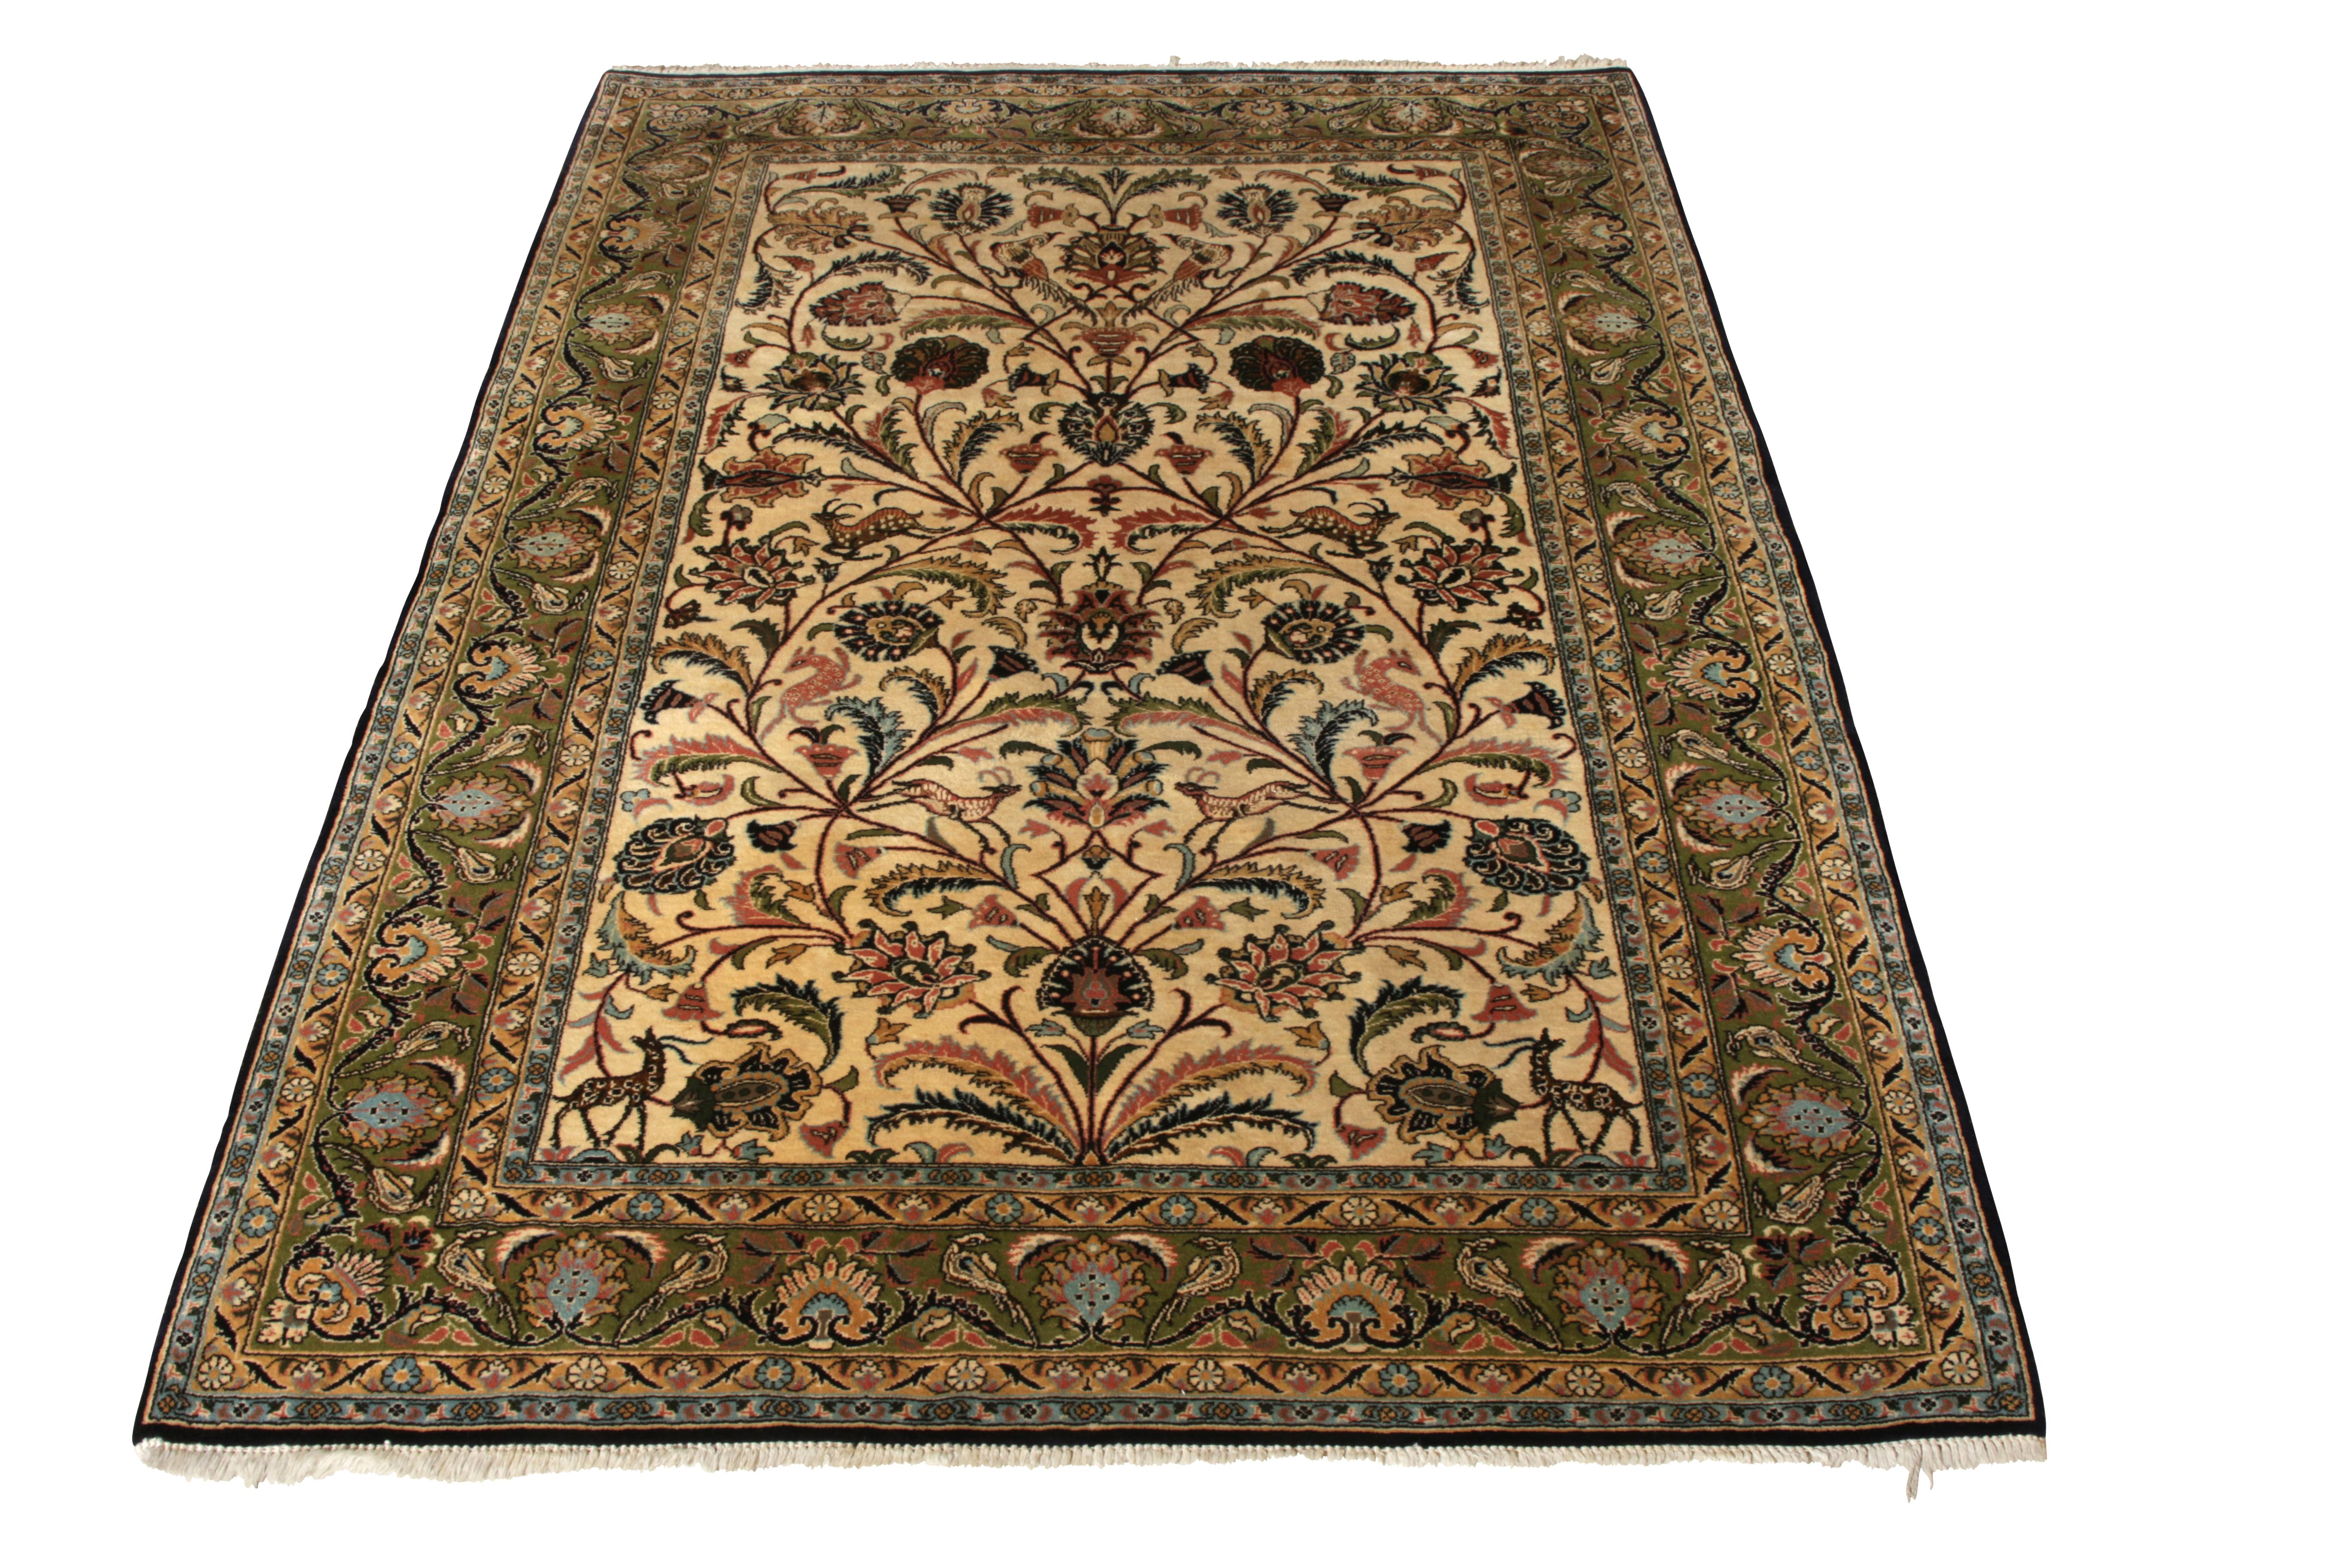 Connoting the fine aesthetics of traditional design in hand-knotted silk, this vintage 5x7 Persian rug of Qum lineage spins a tale of finesse through an ostentatious floral- pattern with a fabulous sense of movement. Originating circa 1950-1960, the